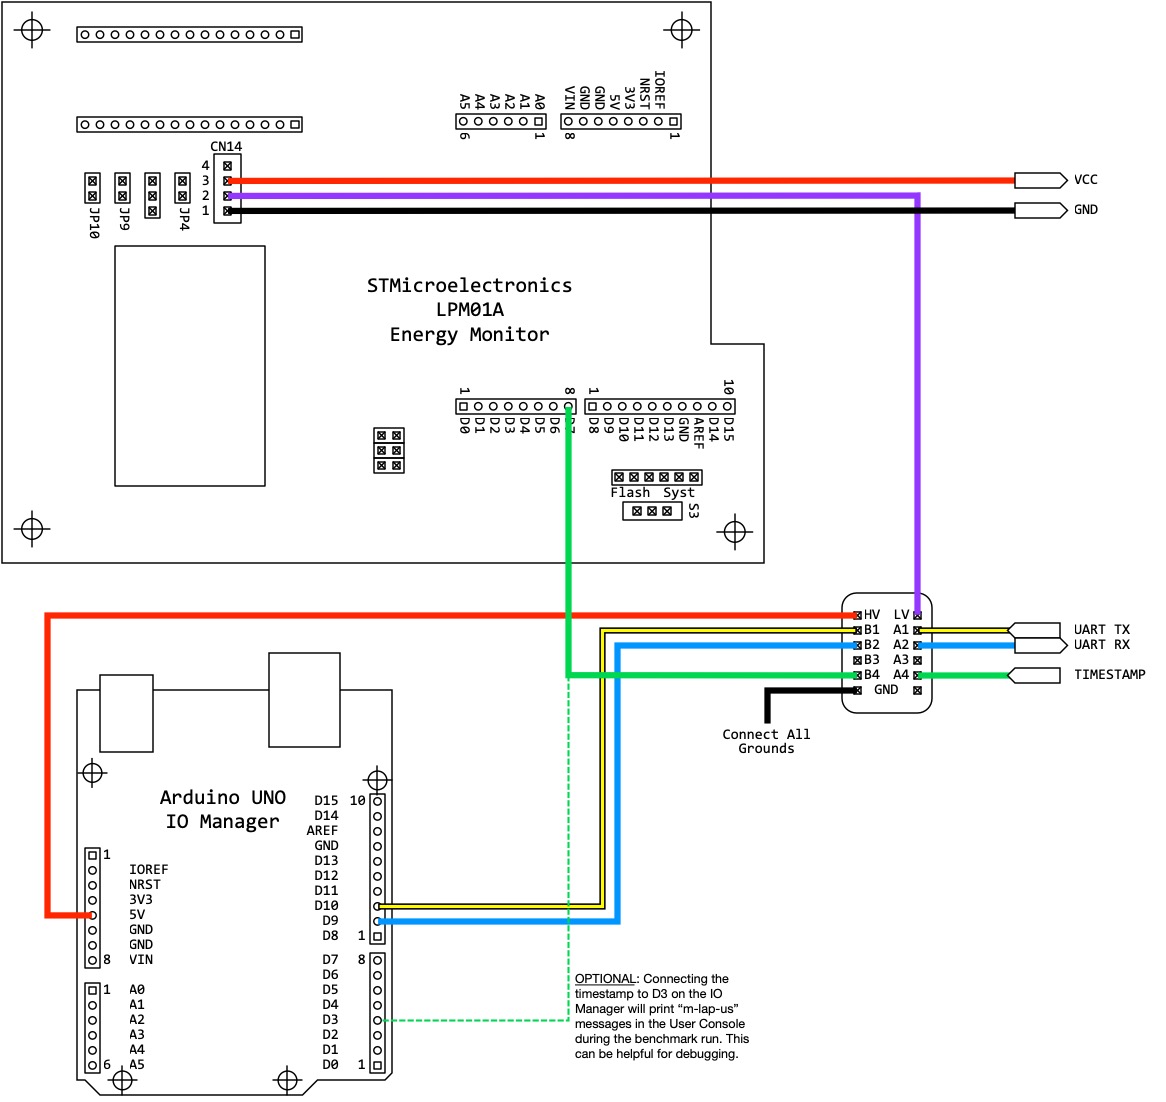 Detailed schematic for LPM01A